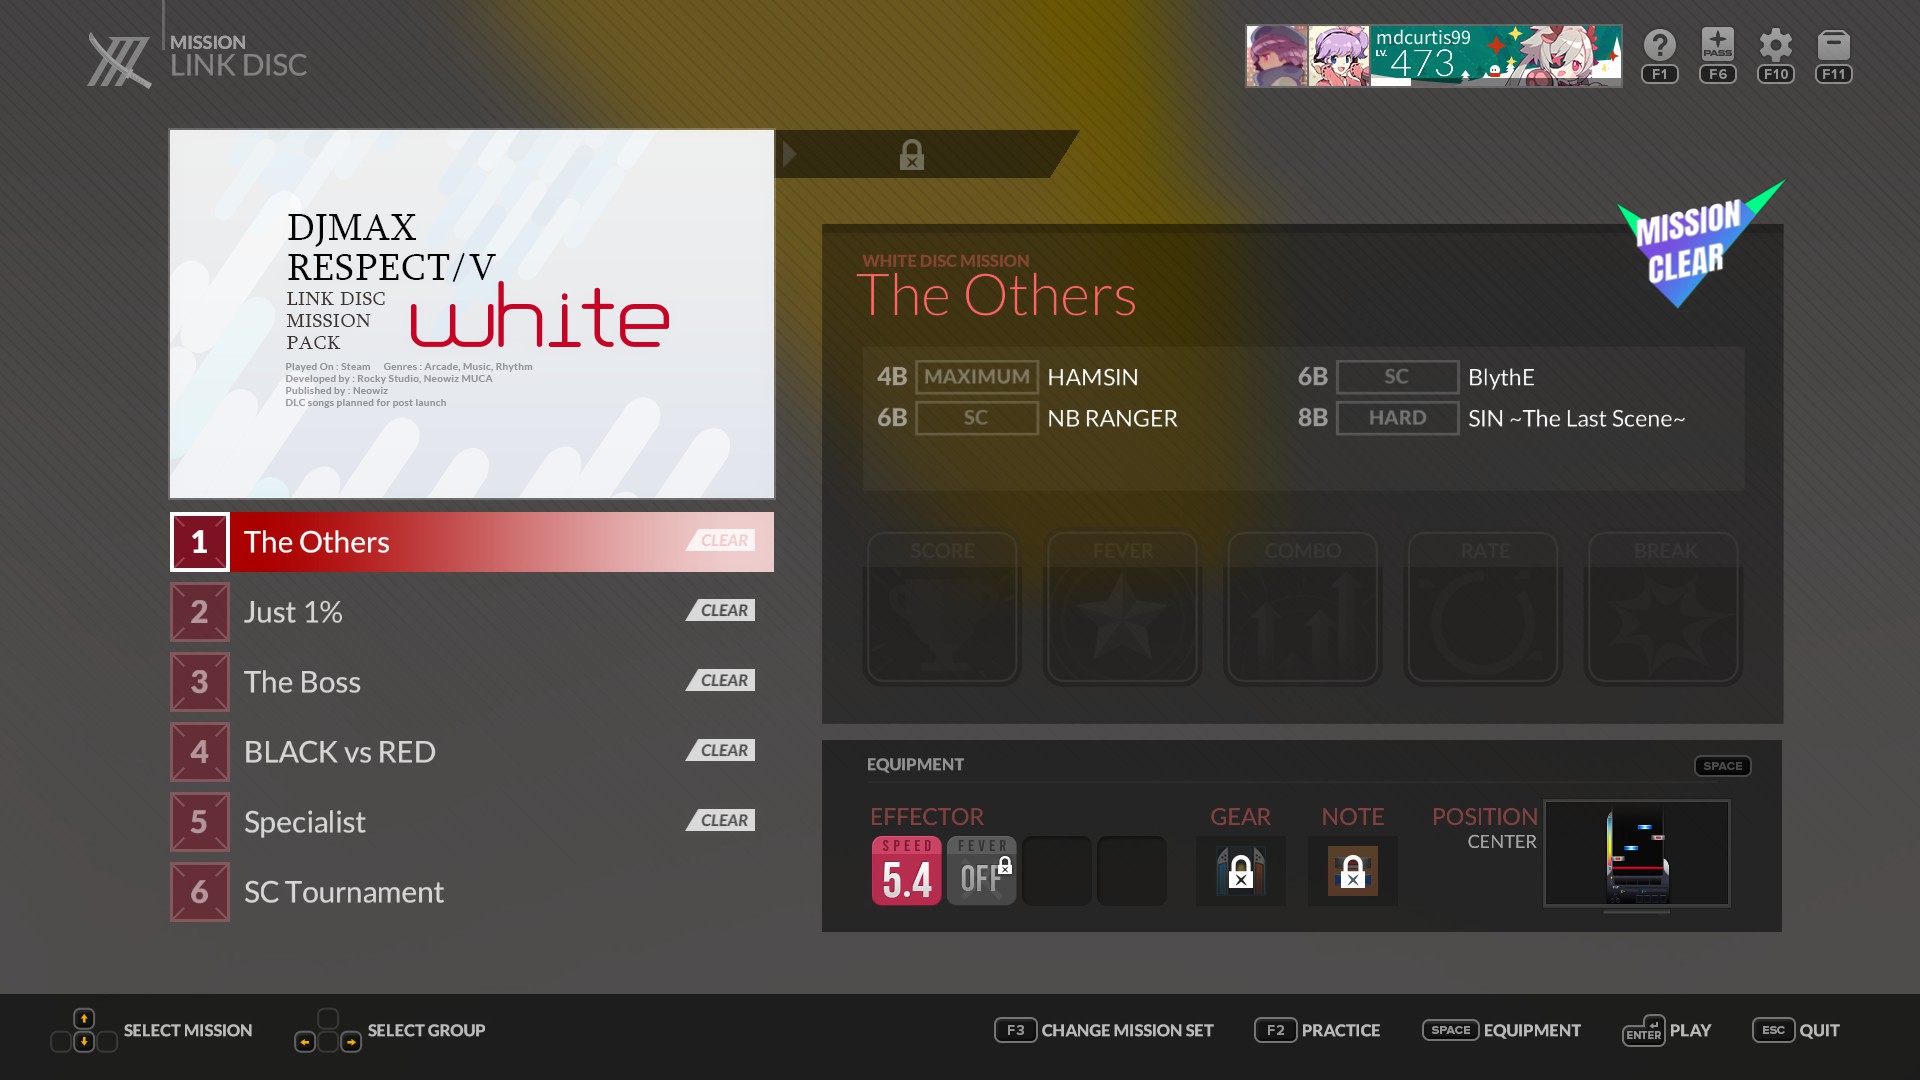 DJMAX RESPECT V - Full Walkthough + All Achievements Guide Complete - Link Disc - 11A2941